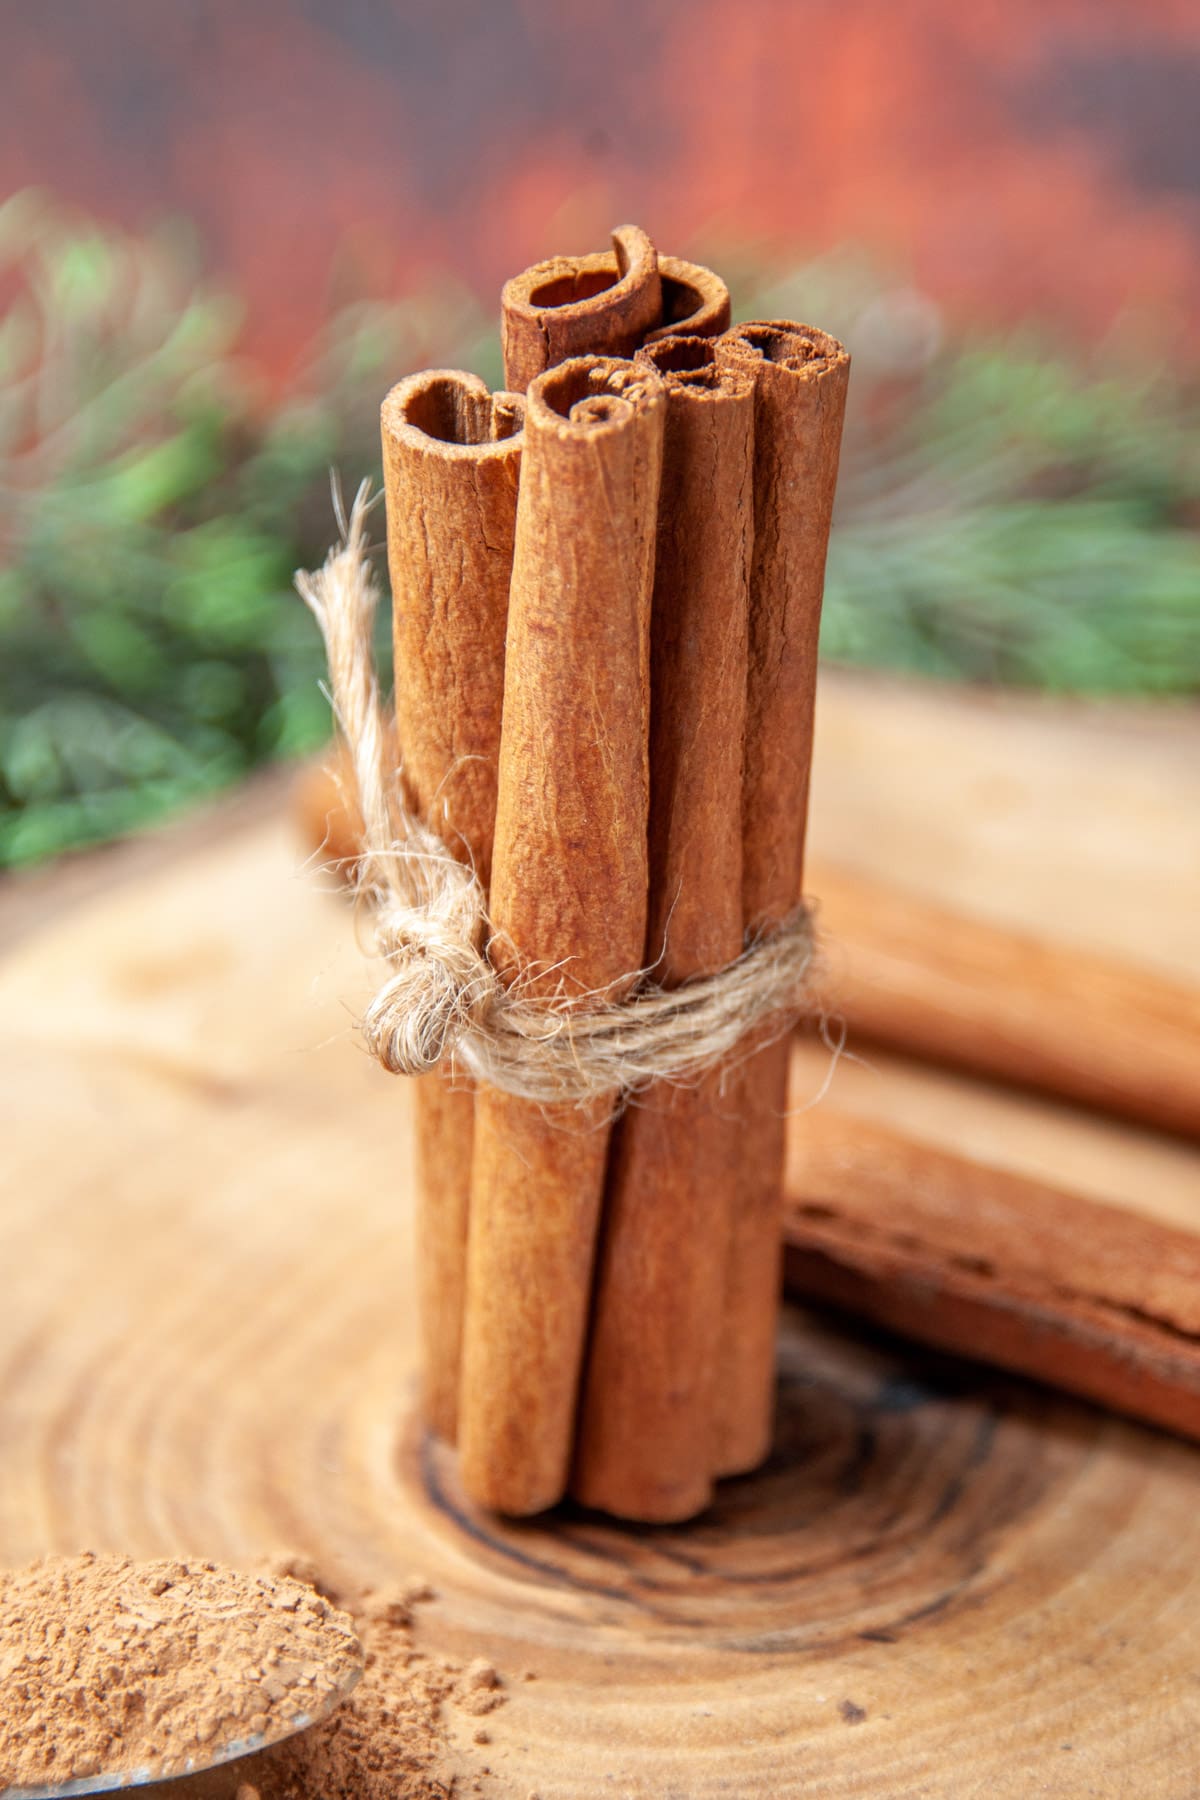 5 cinnamon sticks with a rope sitting on a wooden plate.